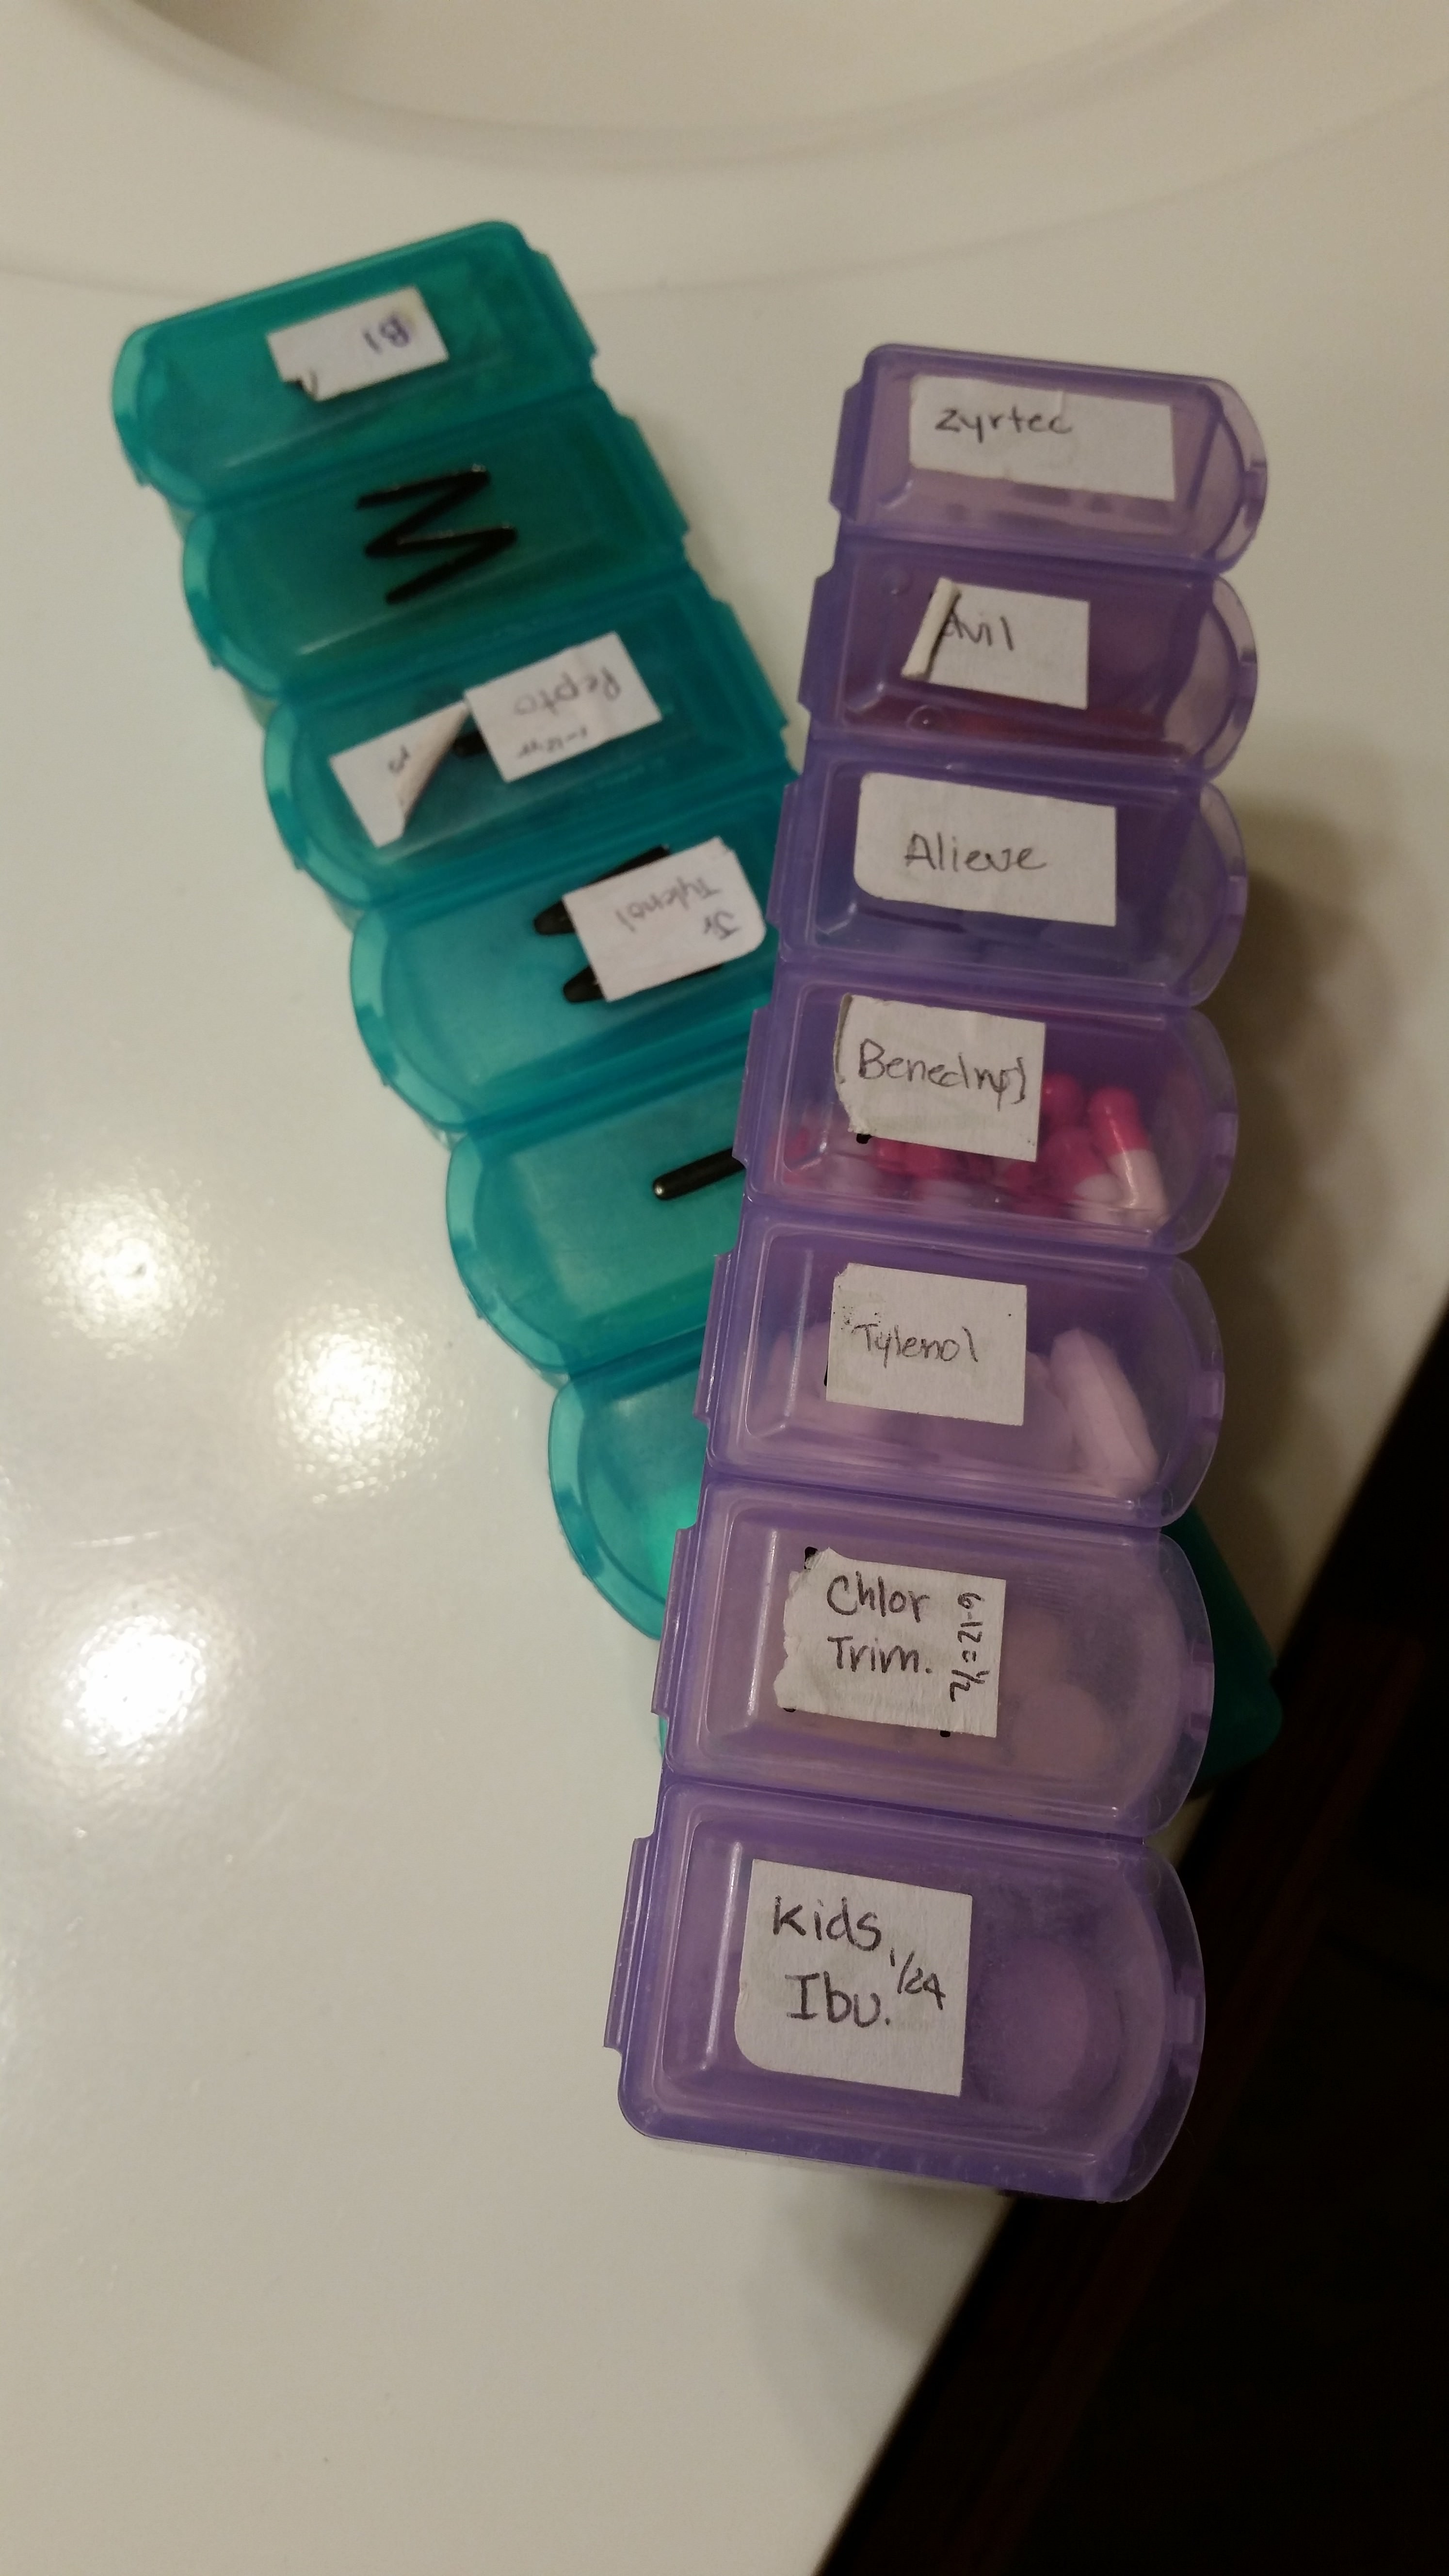 Use medication containers to pack pills for your upcoming trip!